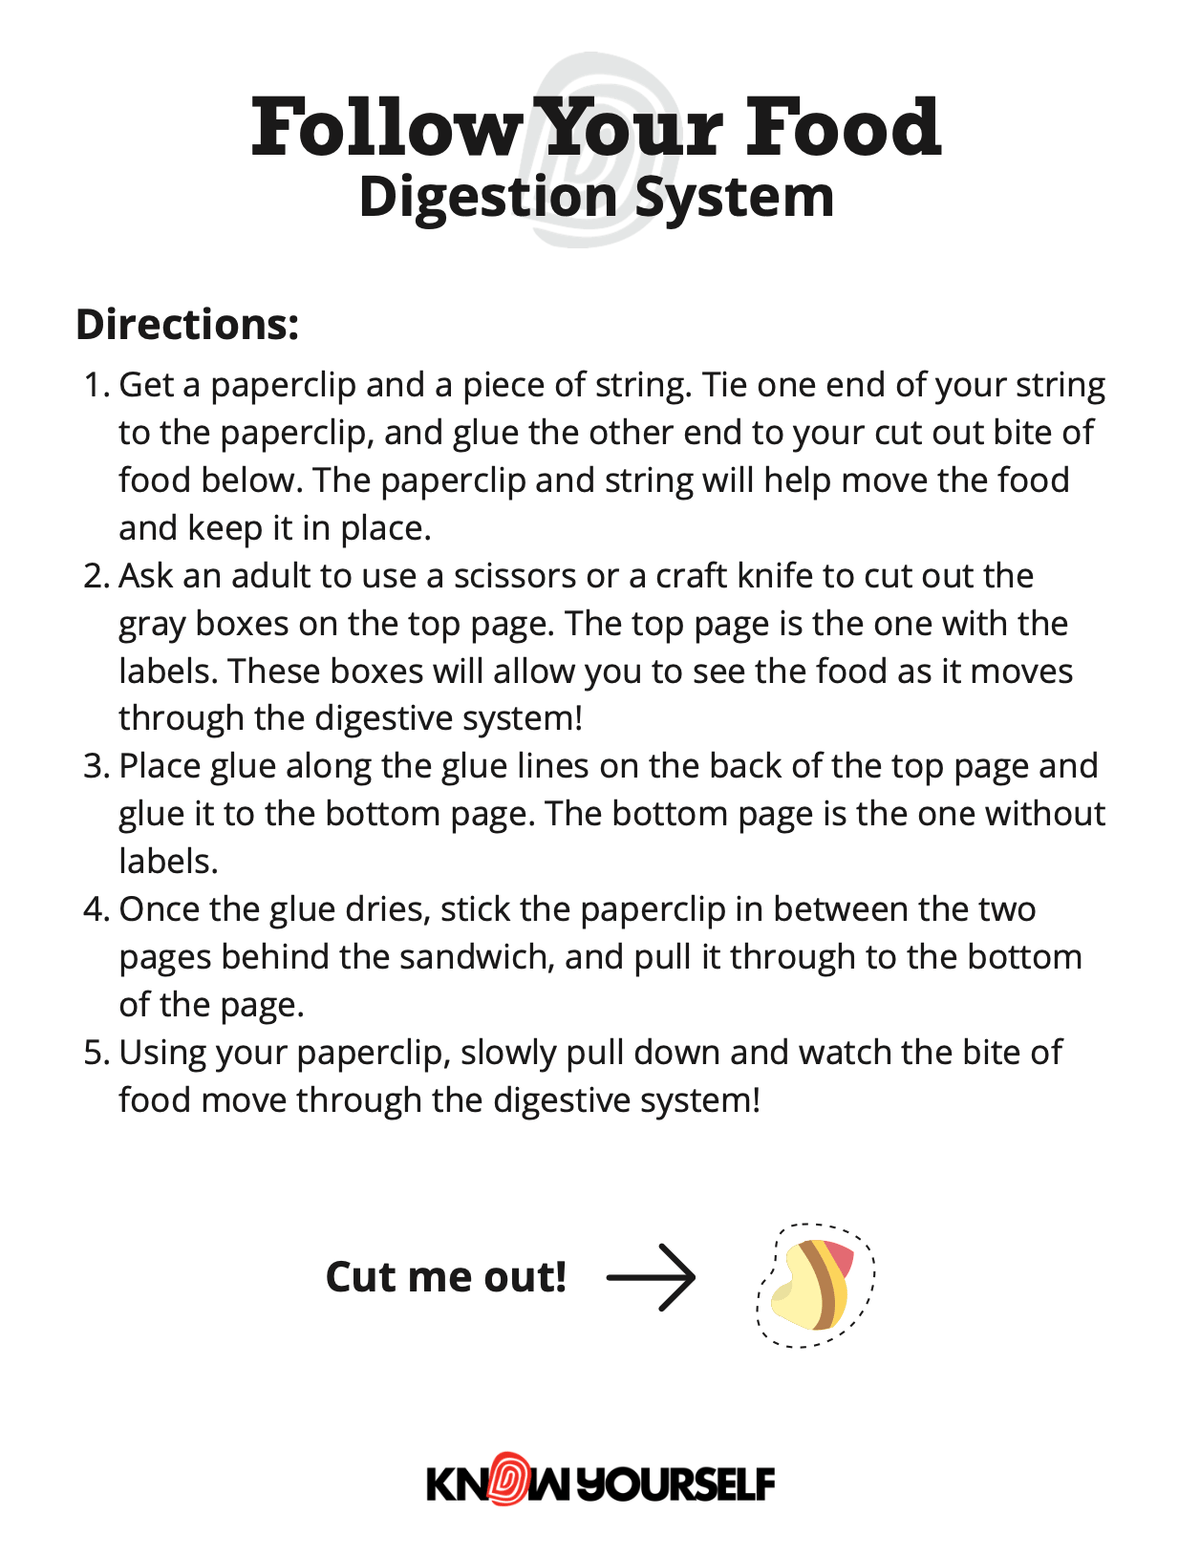 Digestive System Follow Your Food Activity Health Education for Children